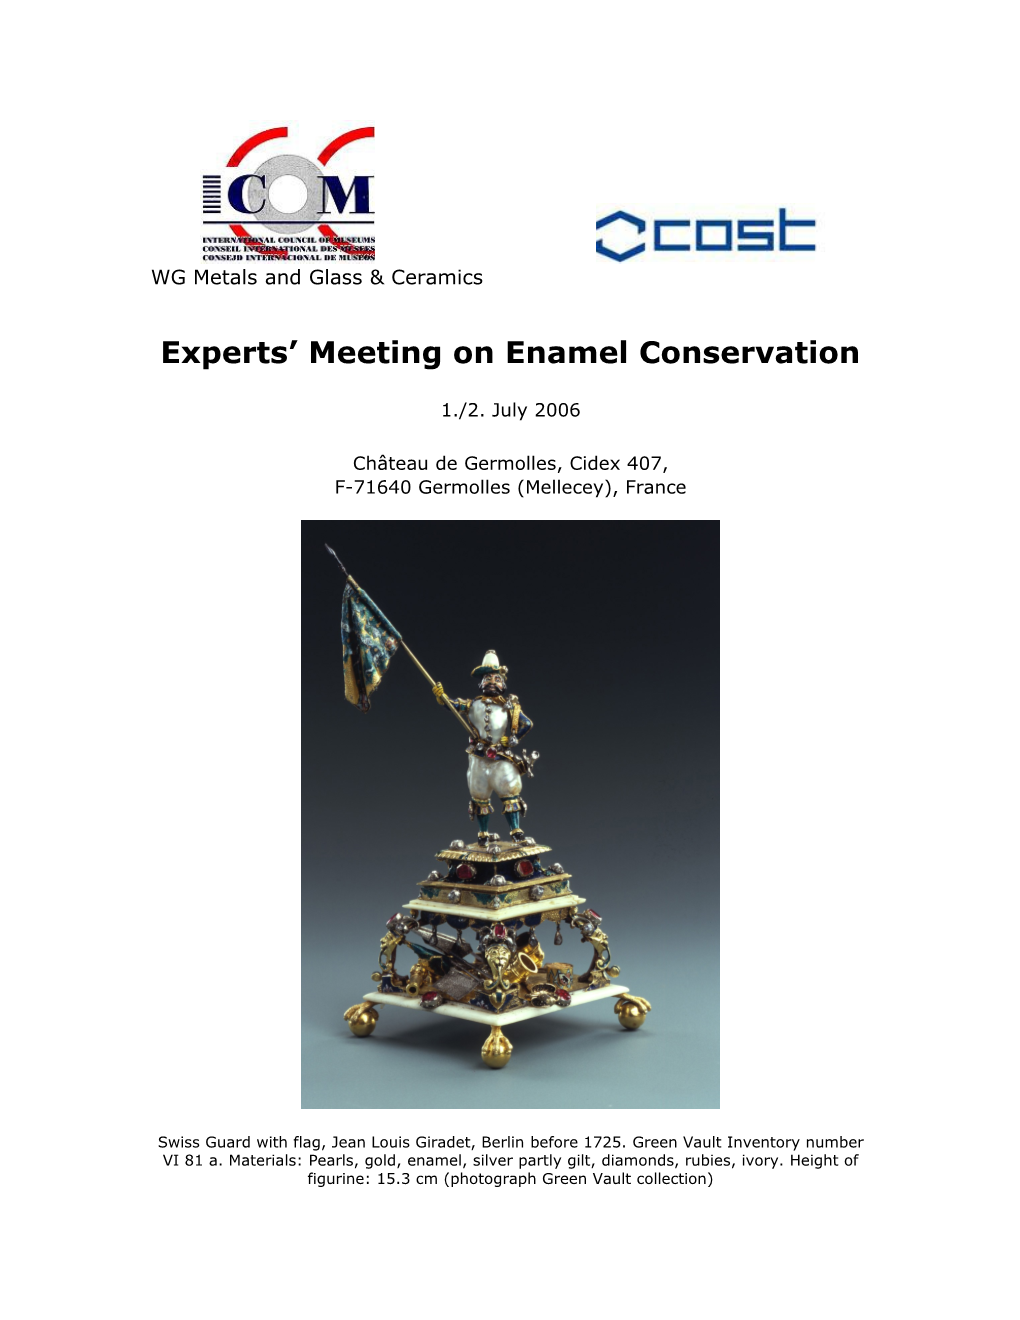 Conservation of Glass/Ceramics and Metals Composite Objects